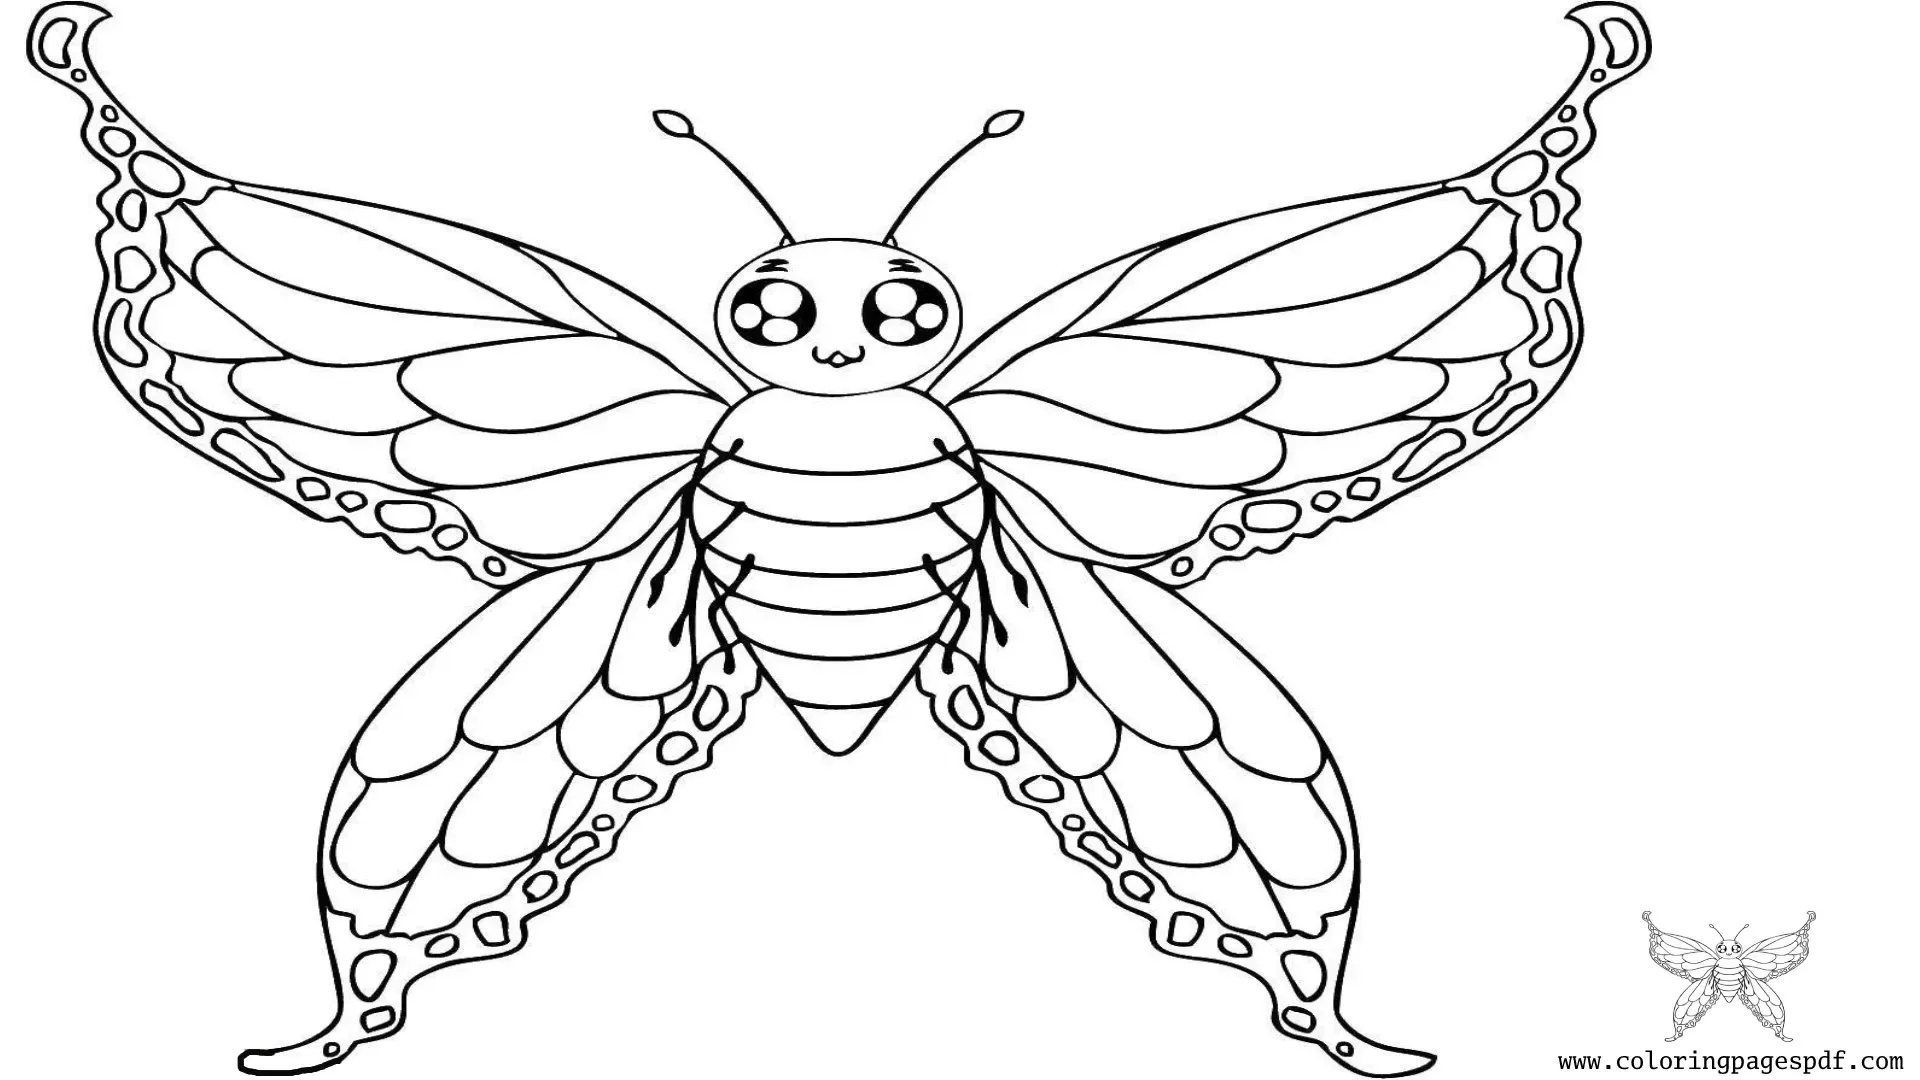 Coloring Page Of A Butterfly With Cute Eyes